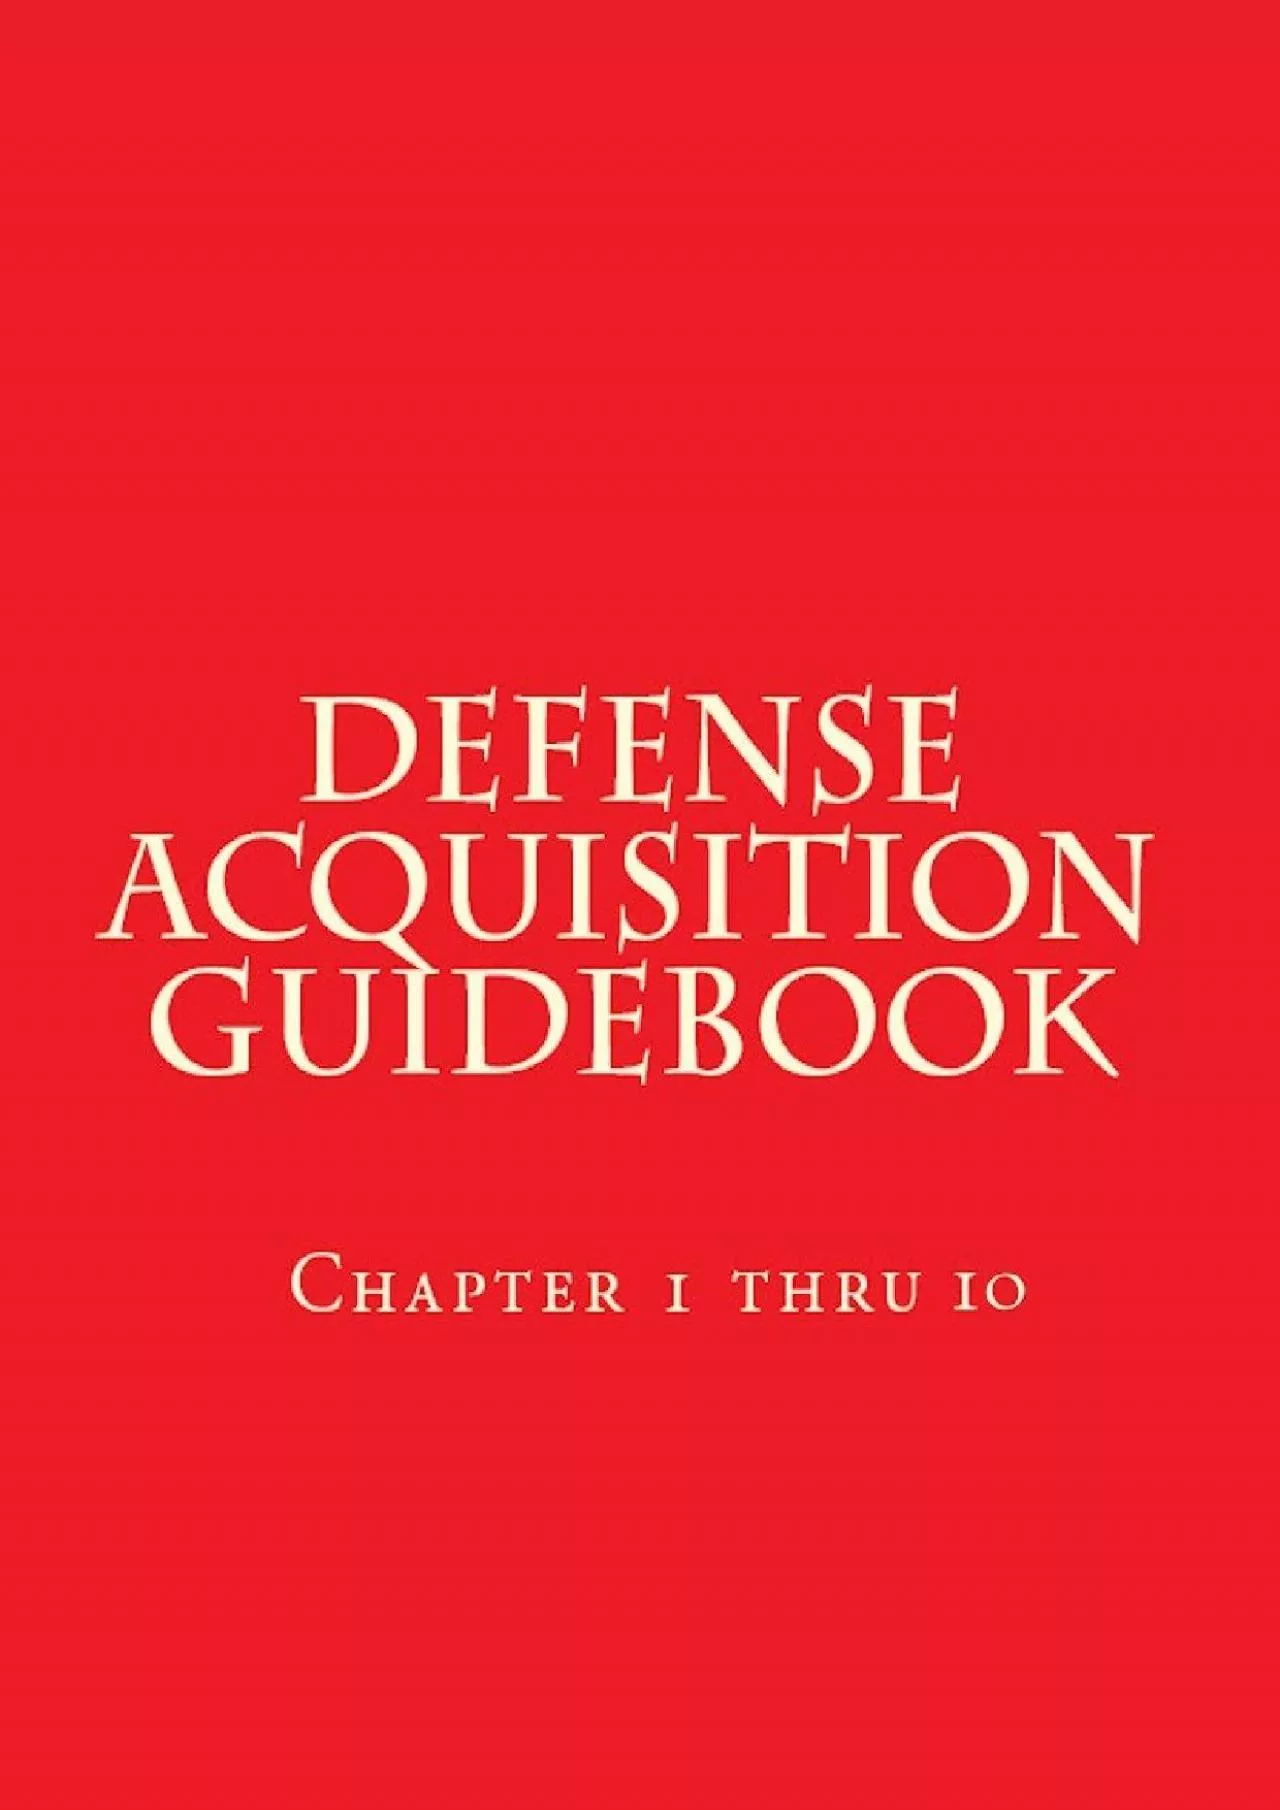 Defense Acquisition Guidebook August 2017: Complete (Chapters 1 thru 10)